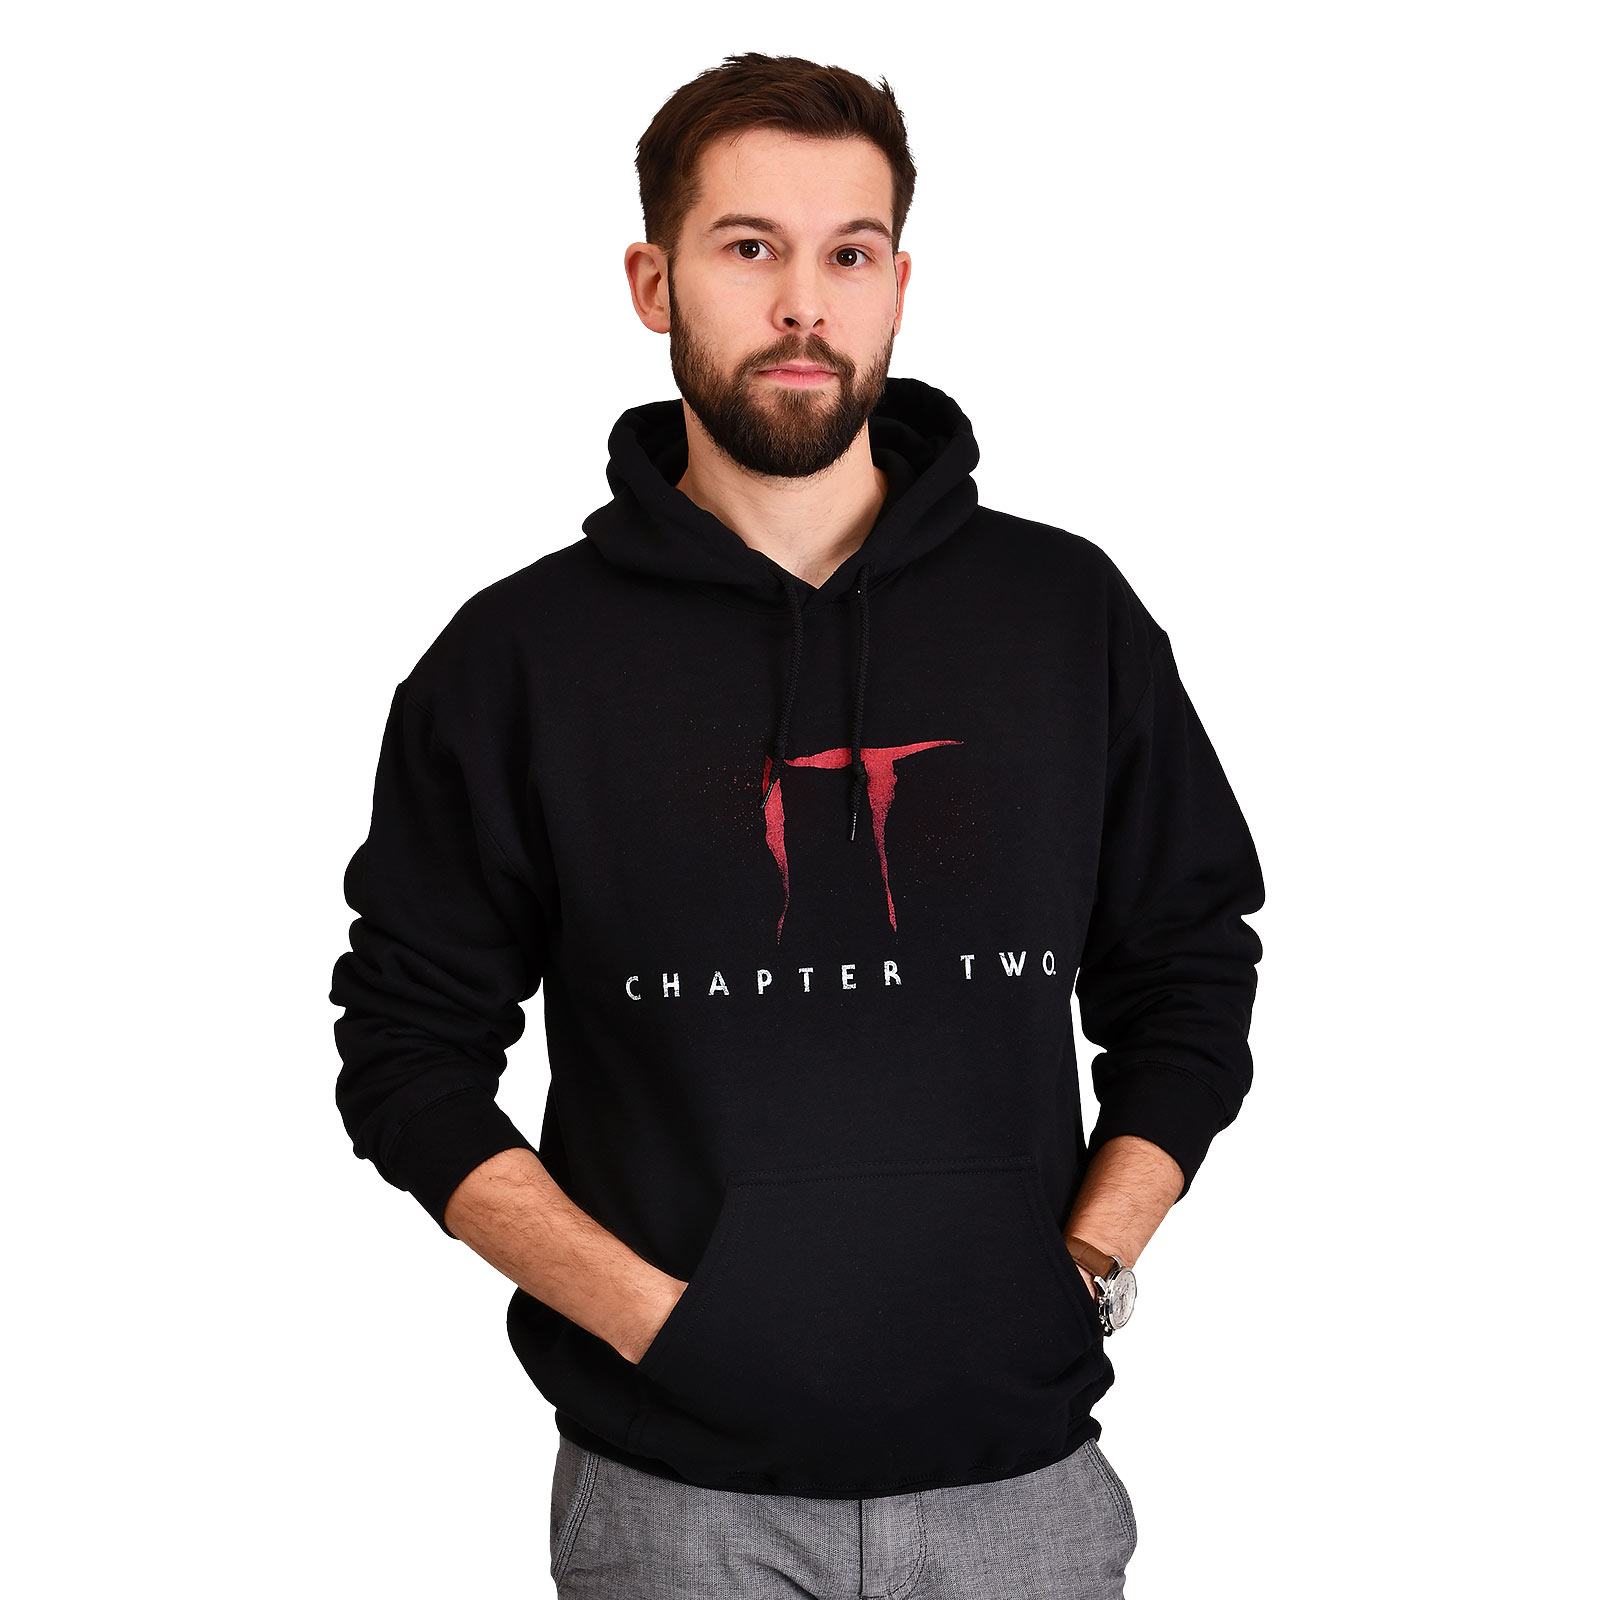 Stephen King's IT - Pennywise Chapter Two Hoodie Black